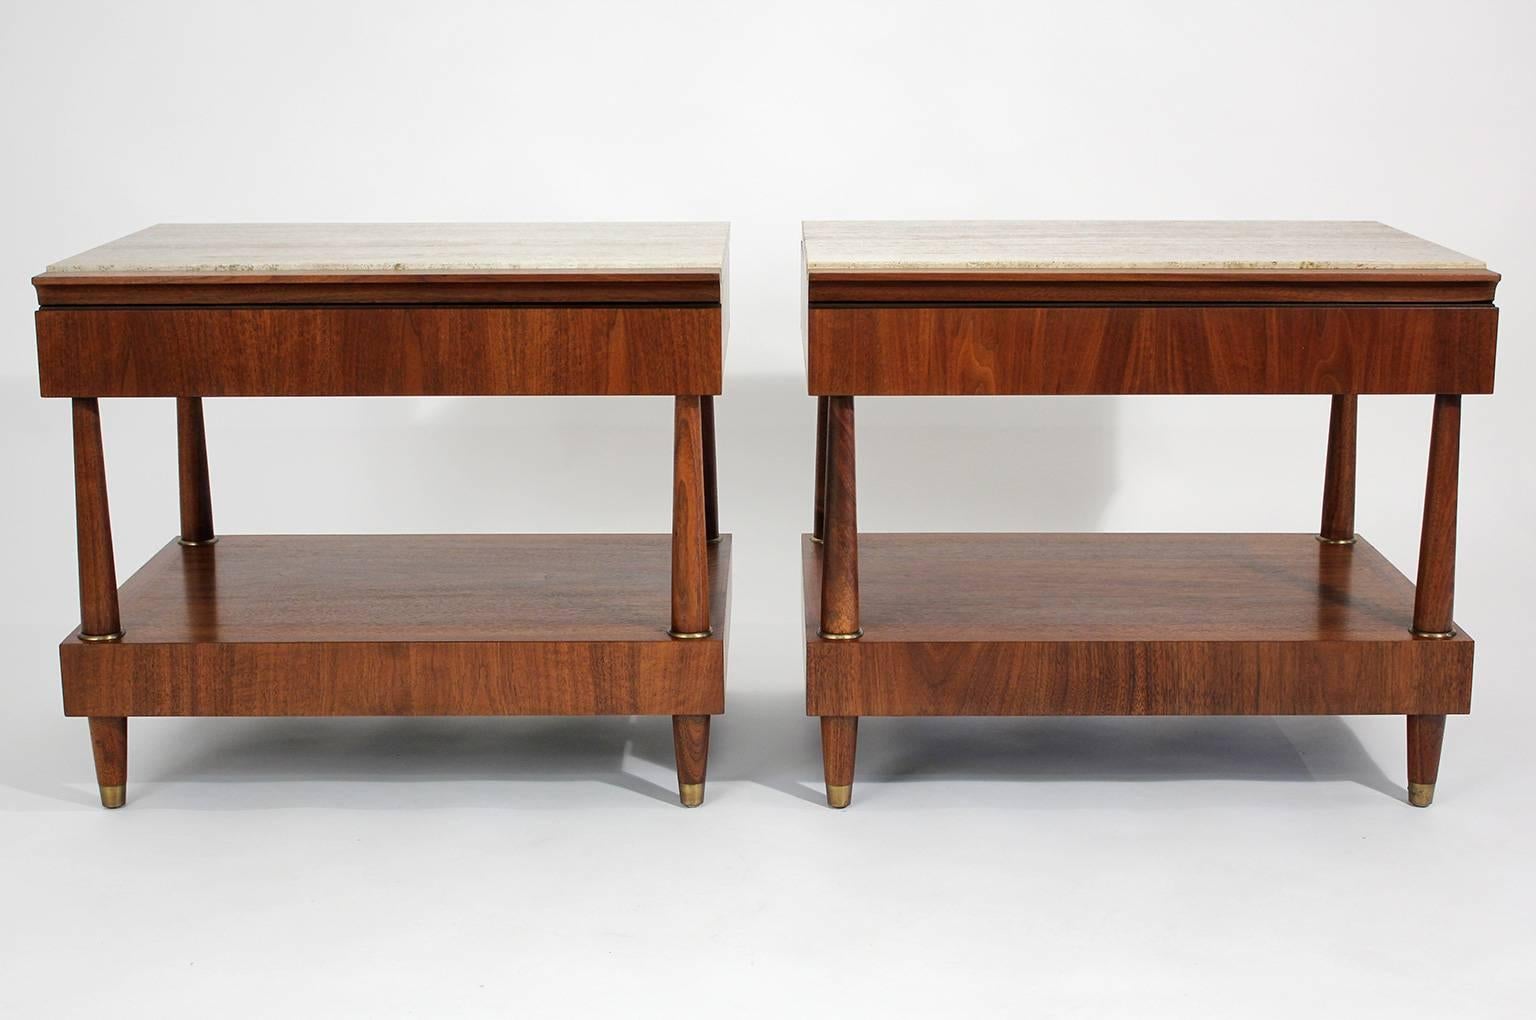 Pair of end tables or night stands with beautiful wood grain, travertine tops and brass accents designed by Bert England for Johnson Furniture, circa 1950s. Restored.